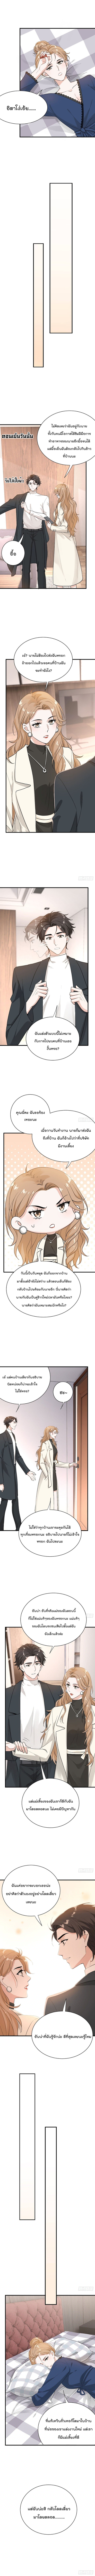 The Faded Memory - หน้า 4